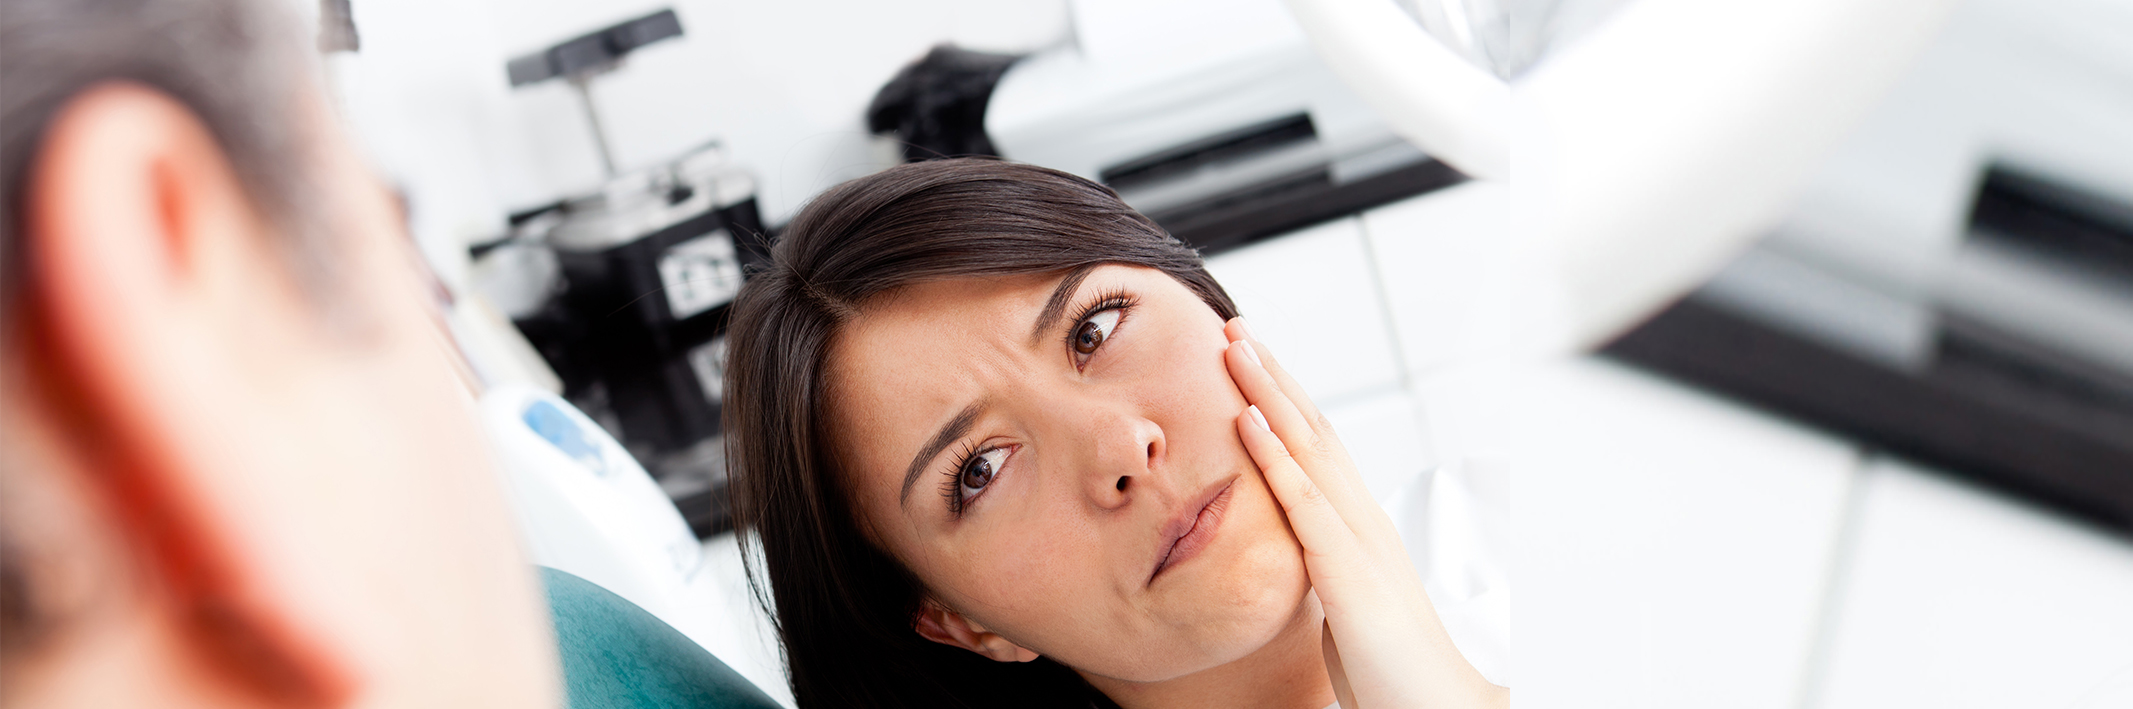 What Is Causing Your Toothache?